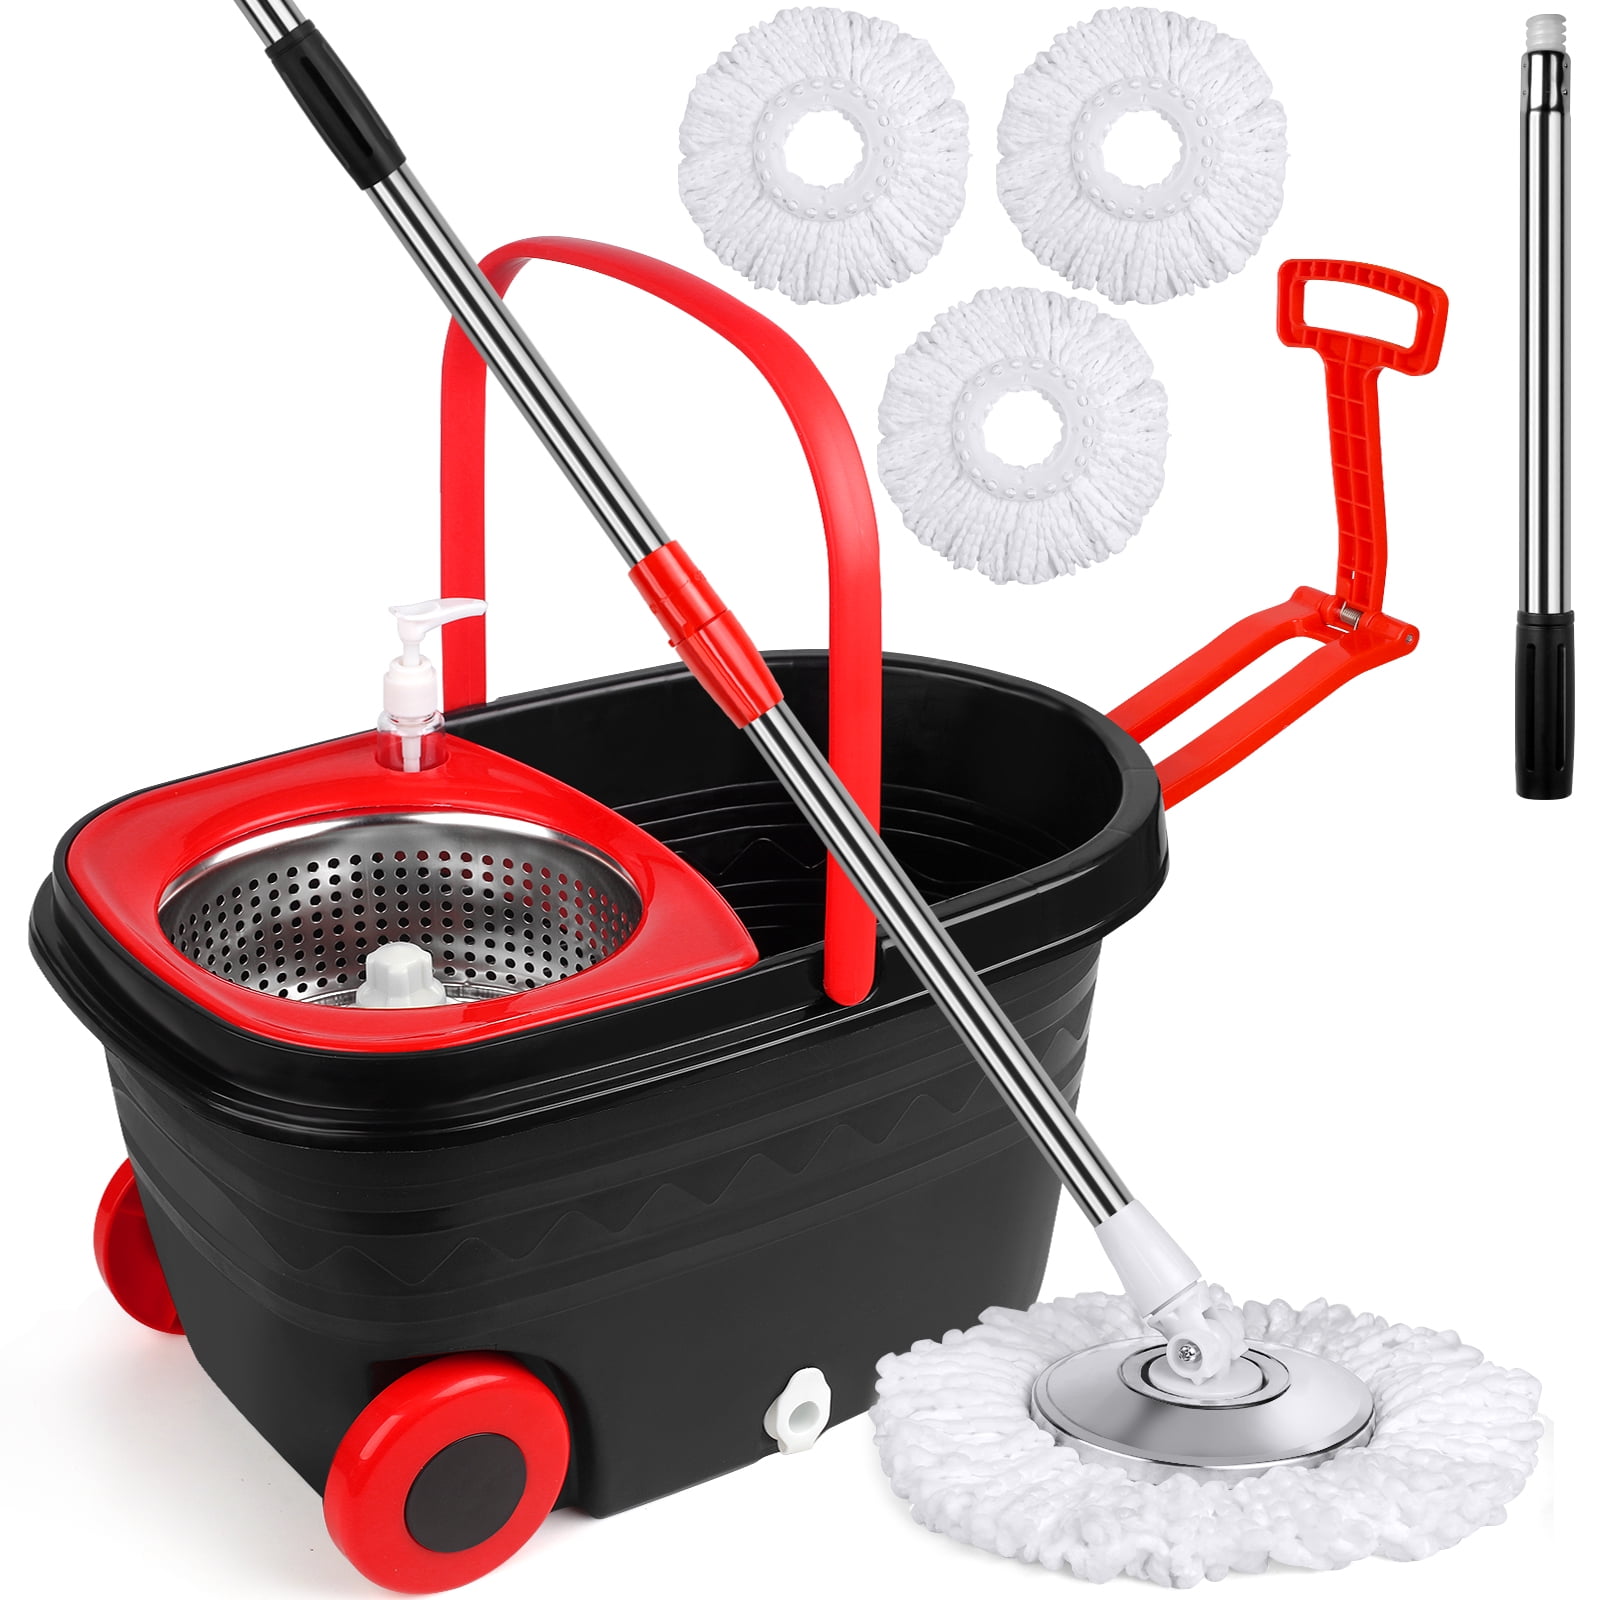 Spin Mop and Bucket on Wheels, Mop and Bucket Set, 360°Spinning Mopping Bucket with 3 Microfiber & 61" Extended Mop Rod for Floor Cleaning, Black & Red - Walmart.com